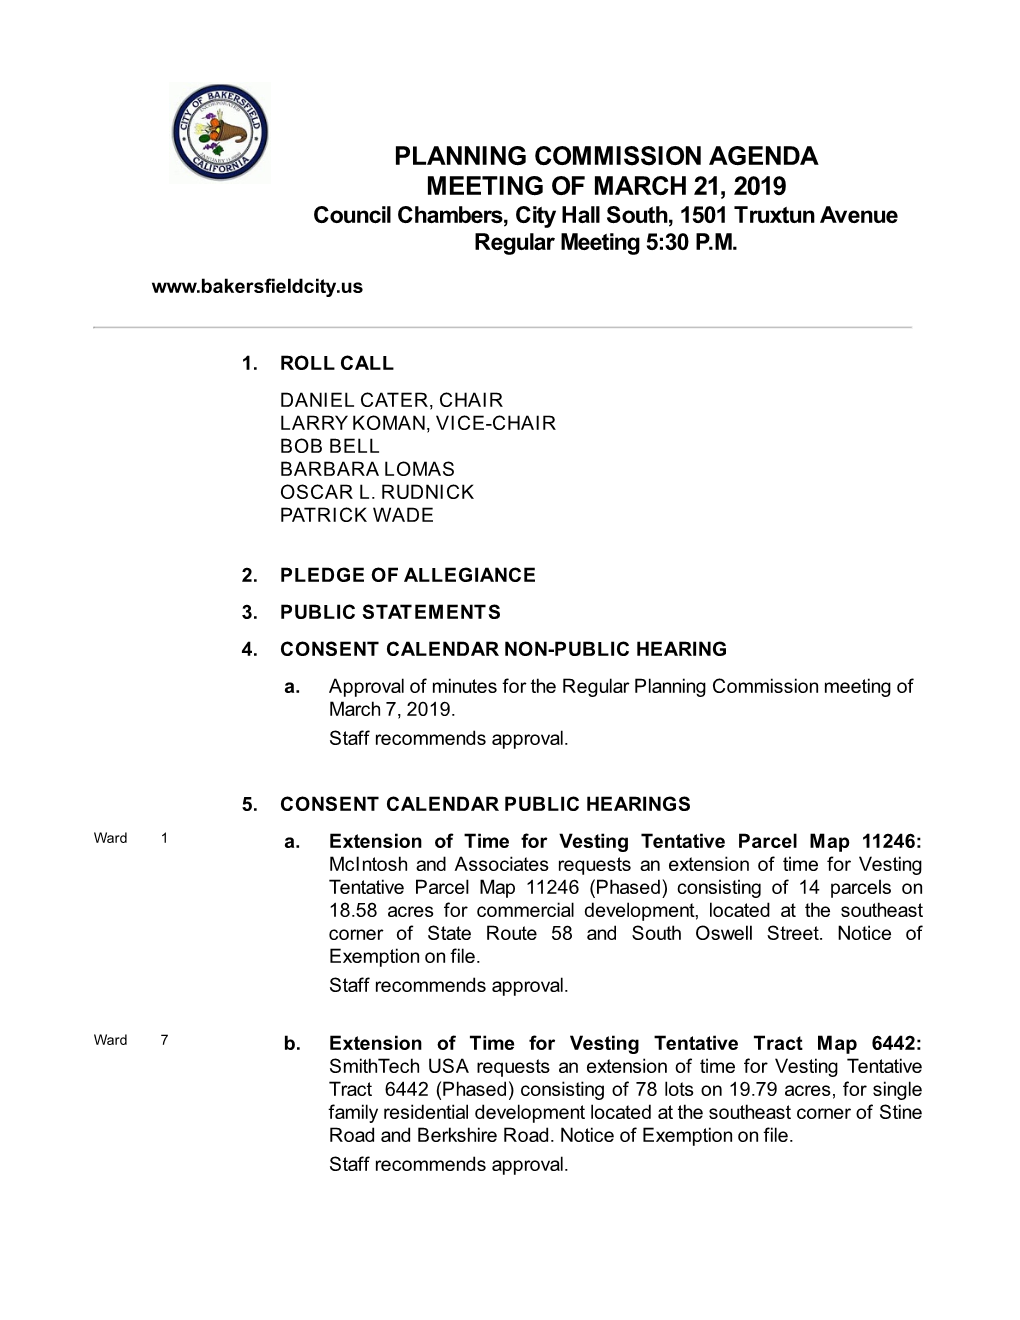 PLANNING COMMISSION AGENDA MEETING of MARCH 21, 2019 Council Chambers, City Hall South, 1501 Truxtun Avenue Regular Meeting 5:30 P.M